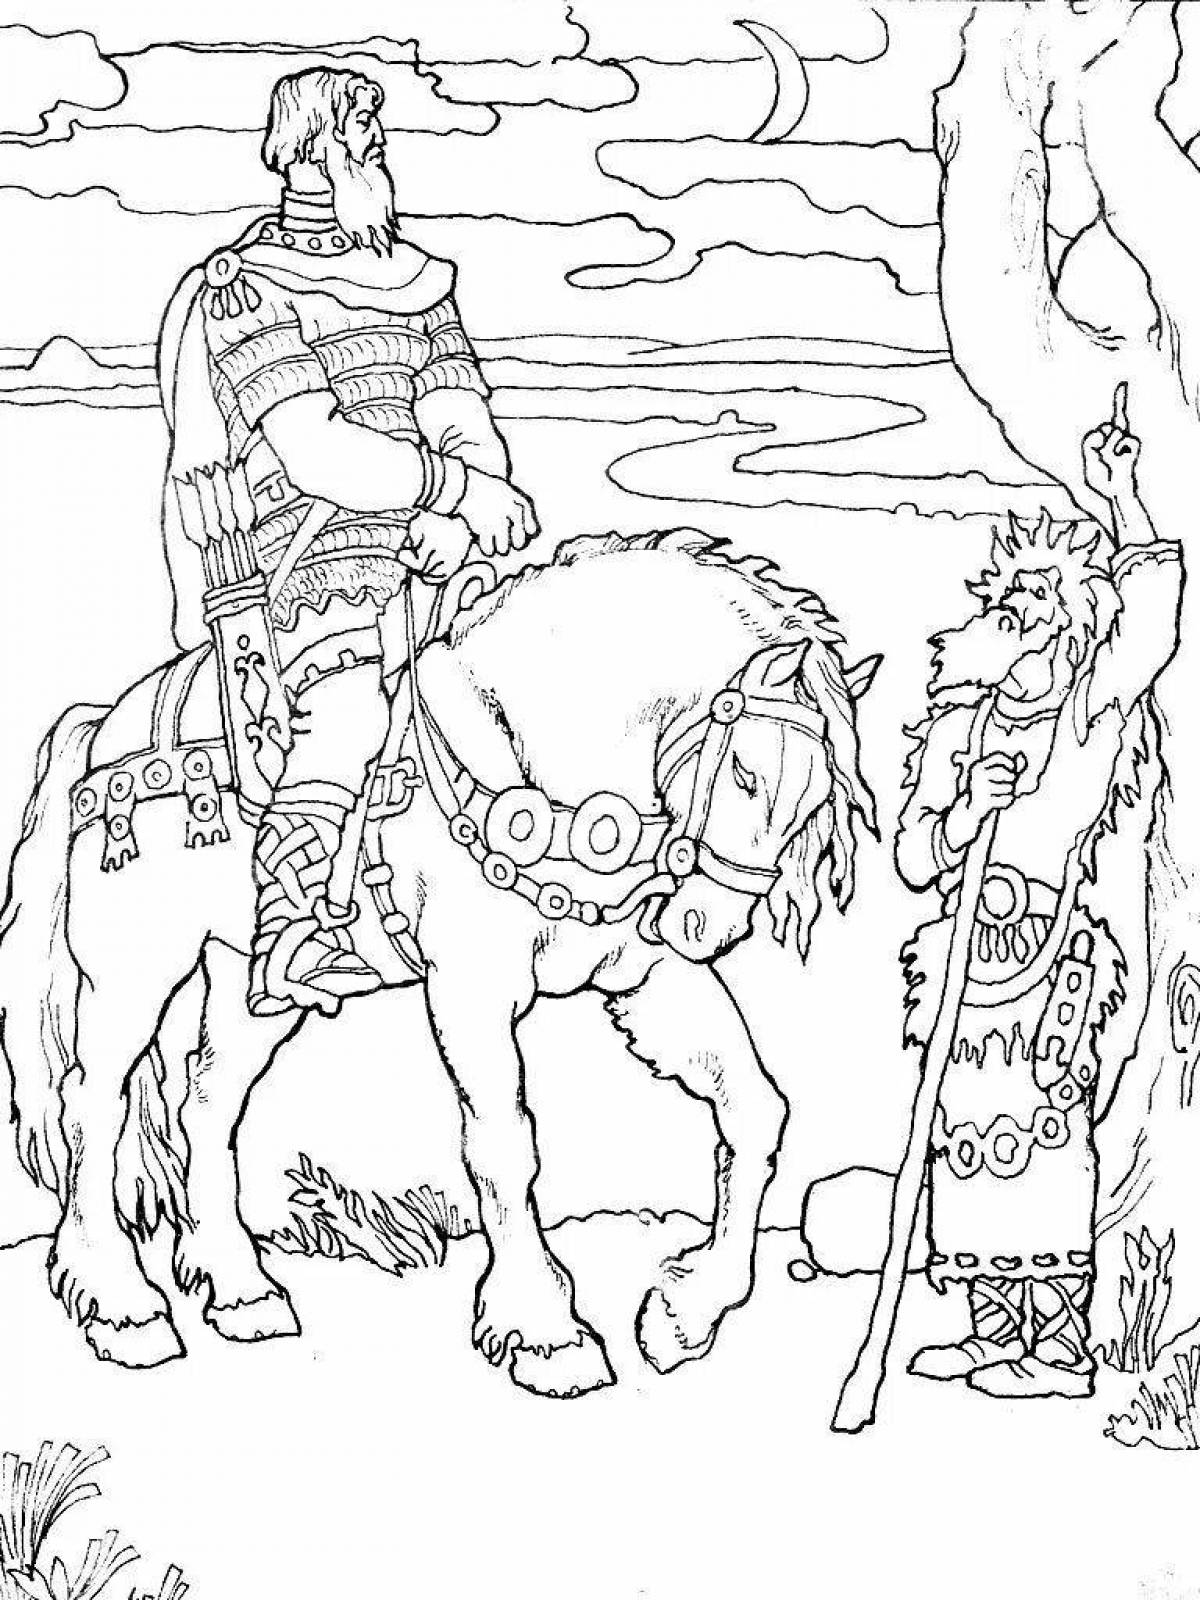 Charming hero coloring book for kids